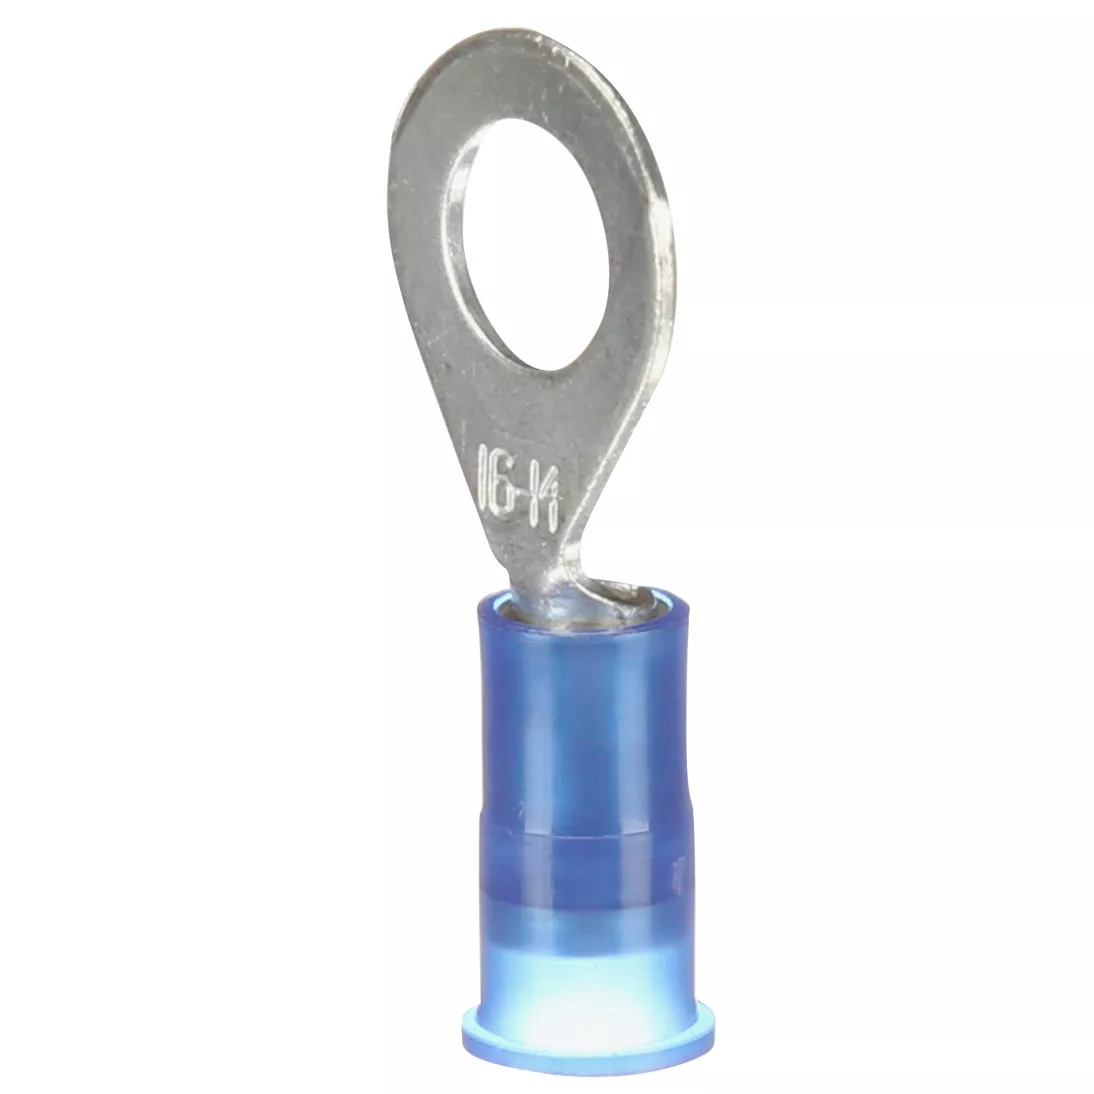 3M™ Scotchlok™ Ring Nylon Insulated, 100/bottle, MNG14-8R/SX,
standard-style ring tongue fits around the stud, 500/Case